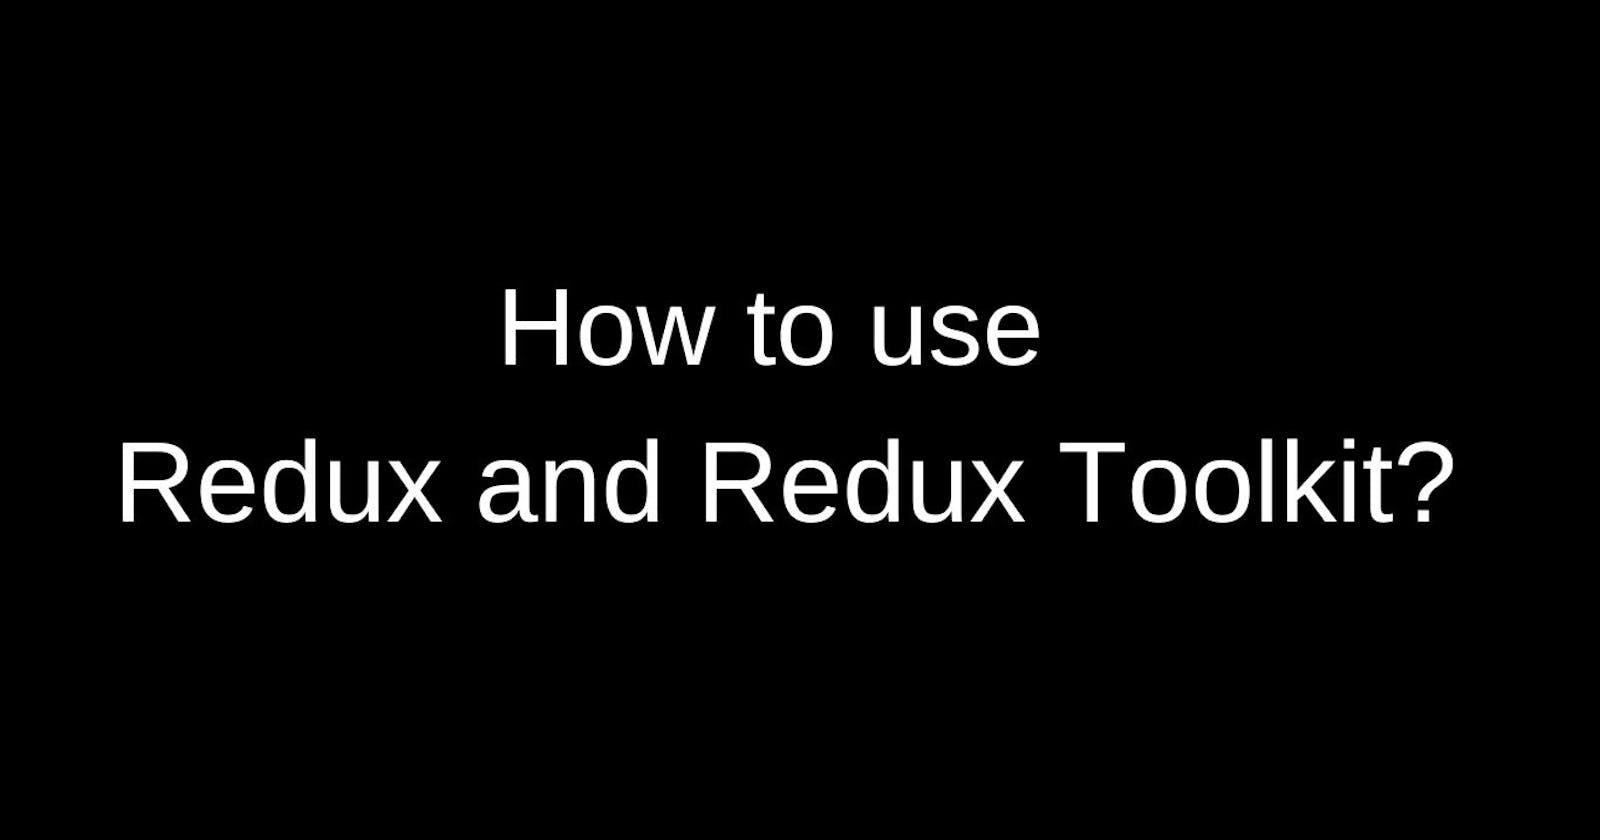 How to use Redux and Redux Toolkit: A practical guide for beginners